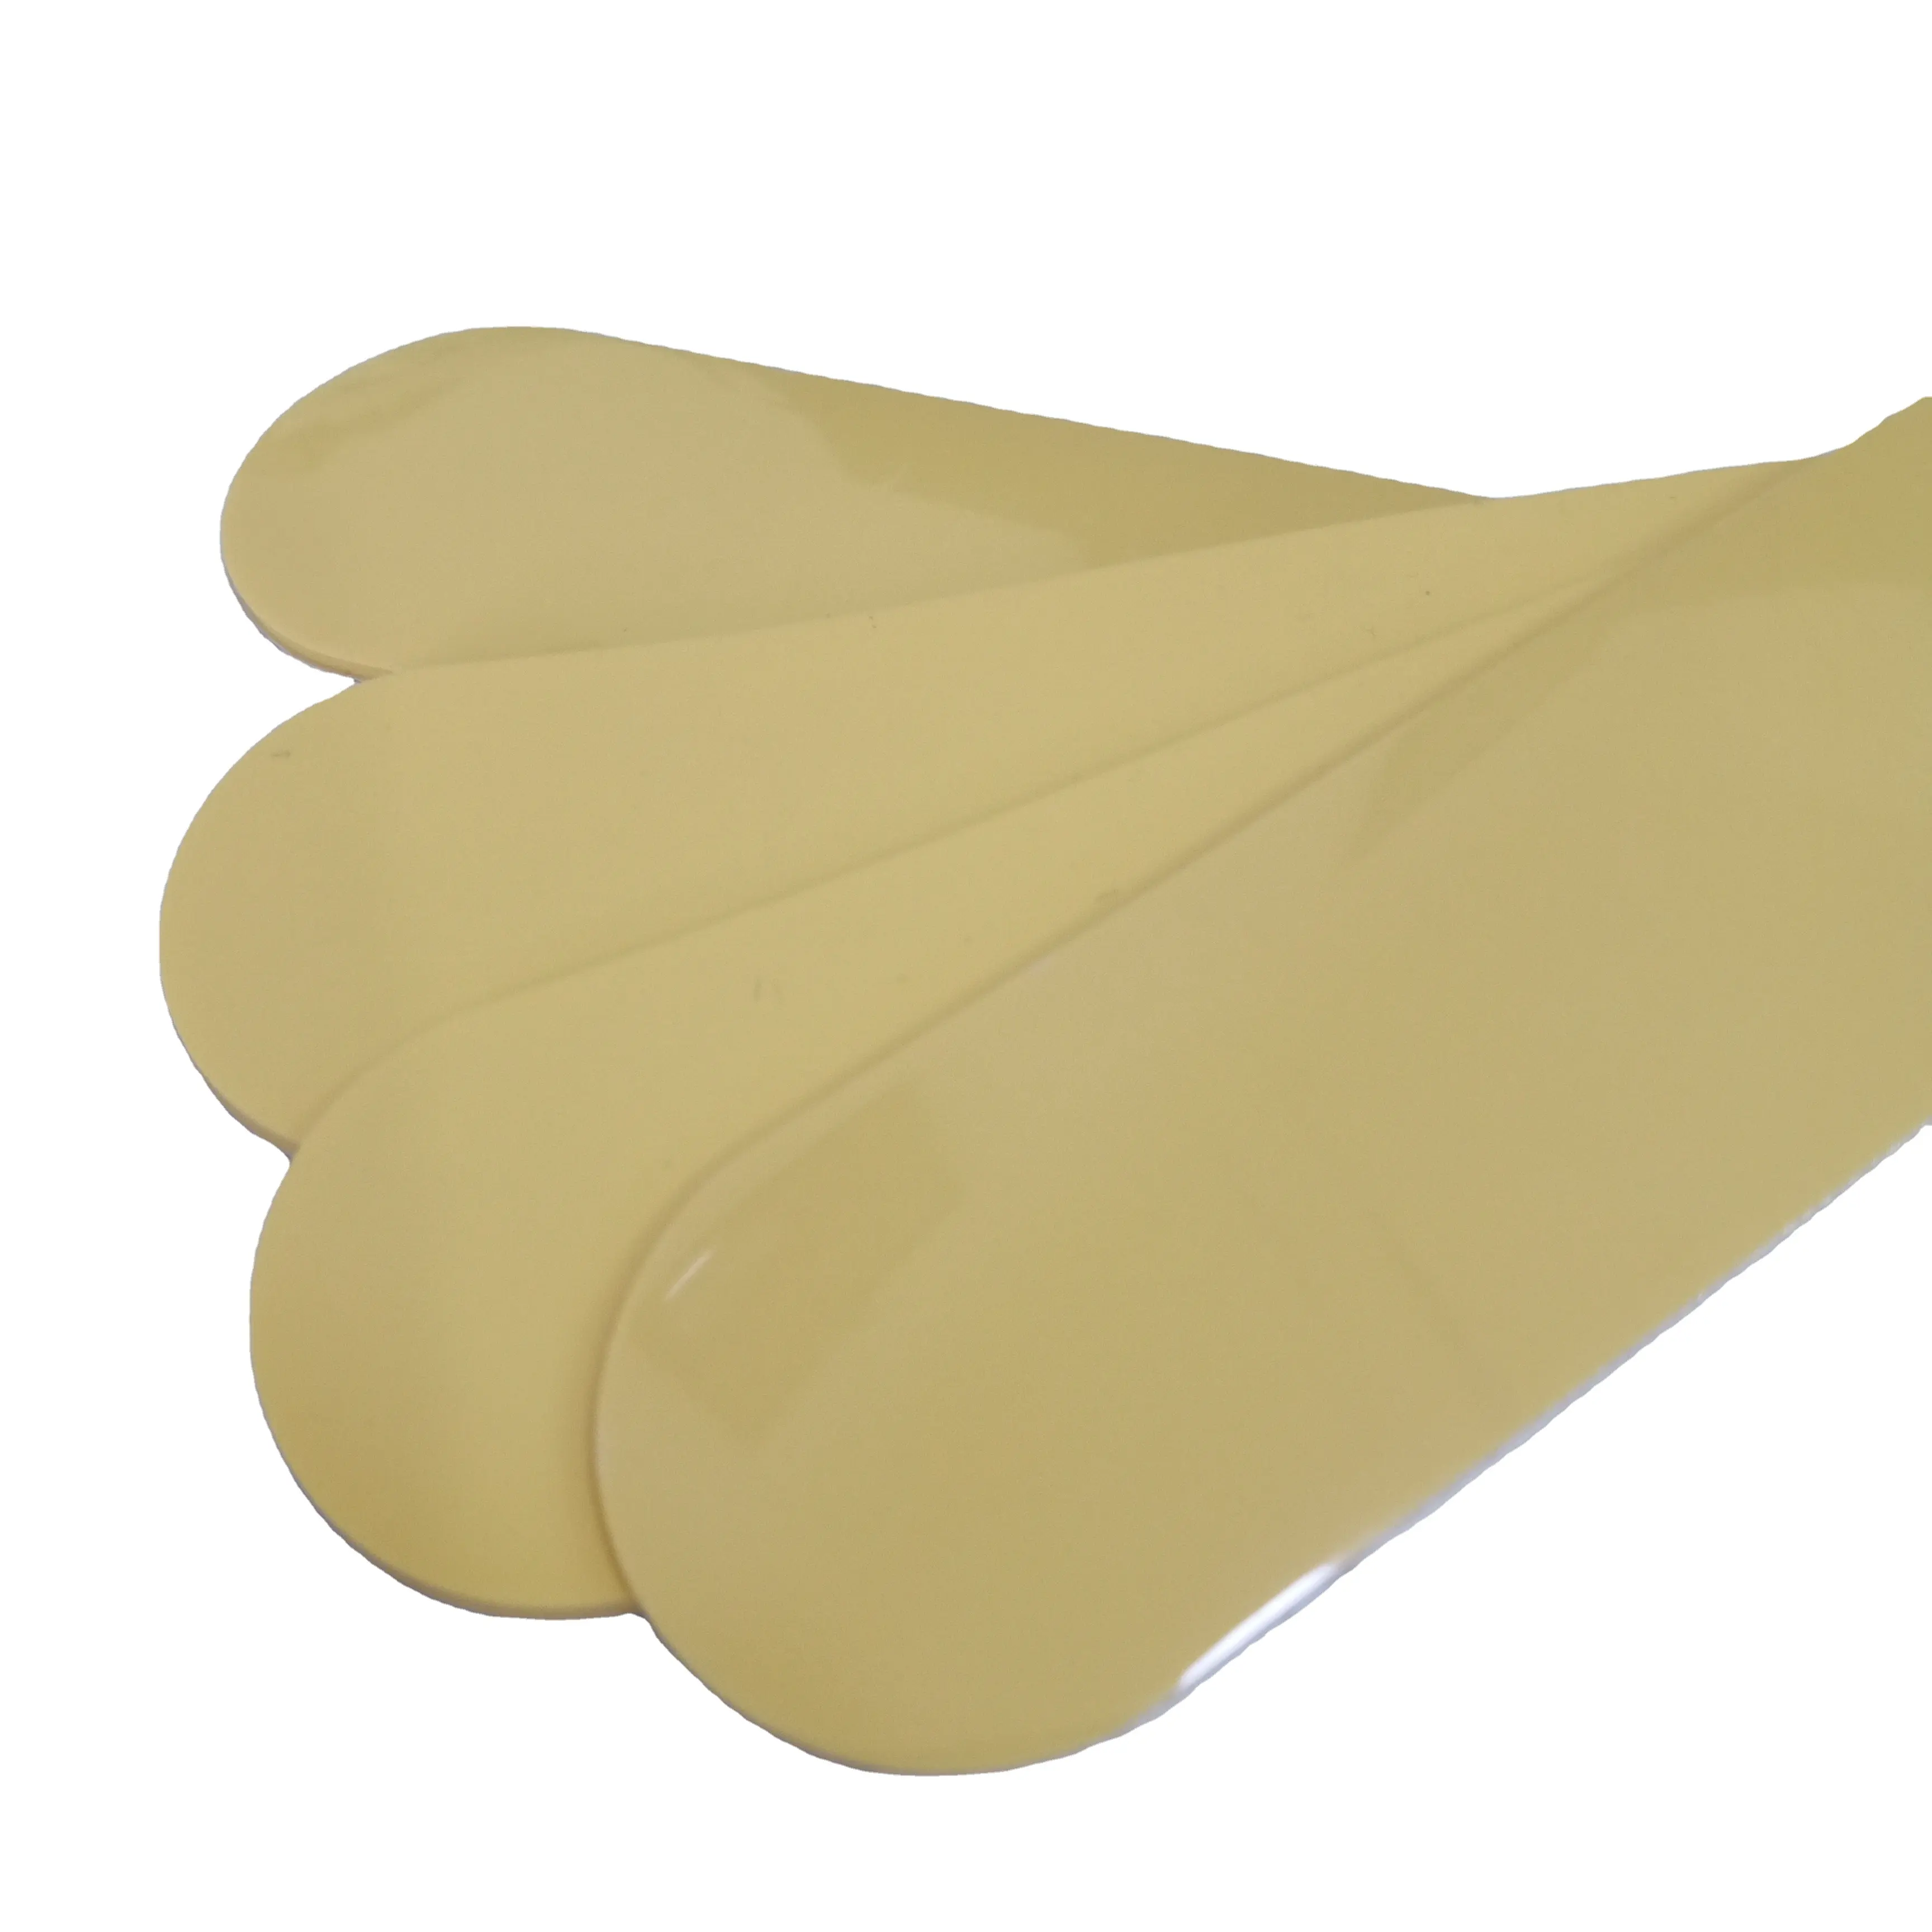 Sticky Feet Pads Silicon Rubber Pads Manufacturer MS double side Non slip Bumpers